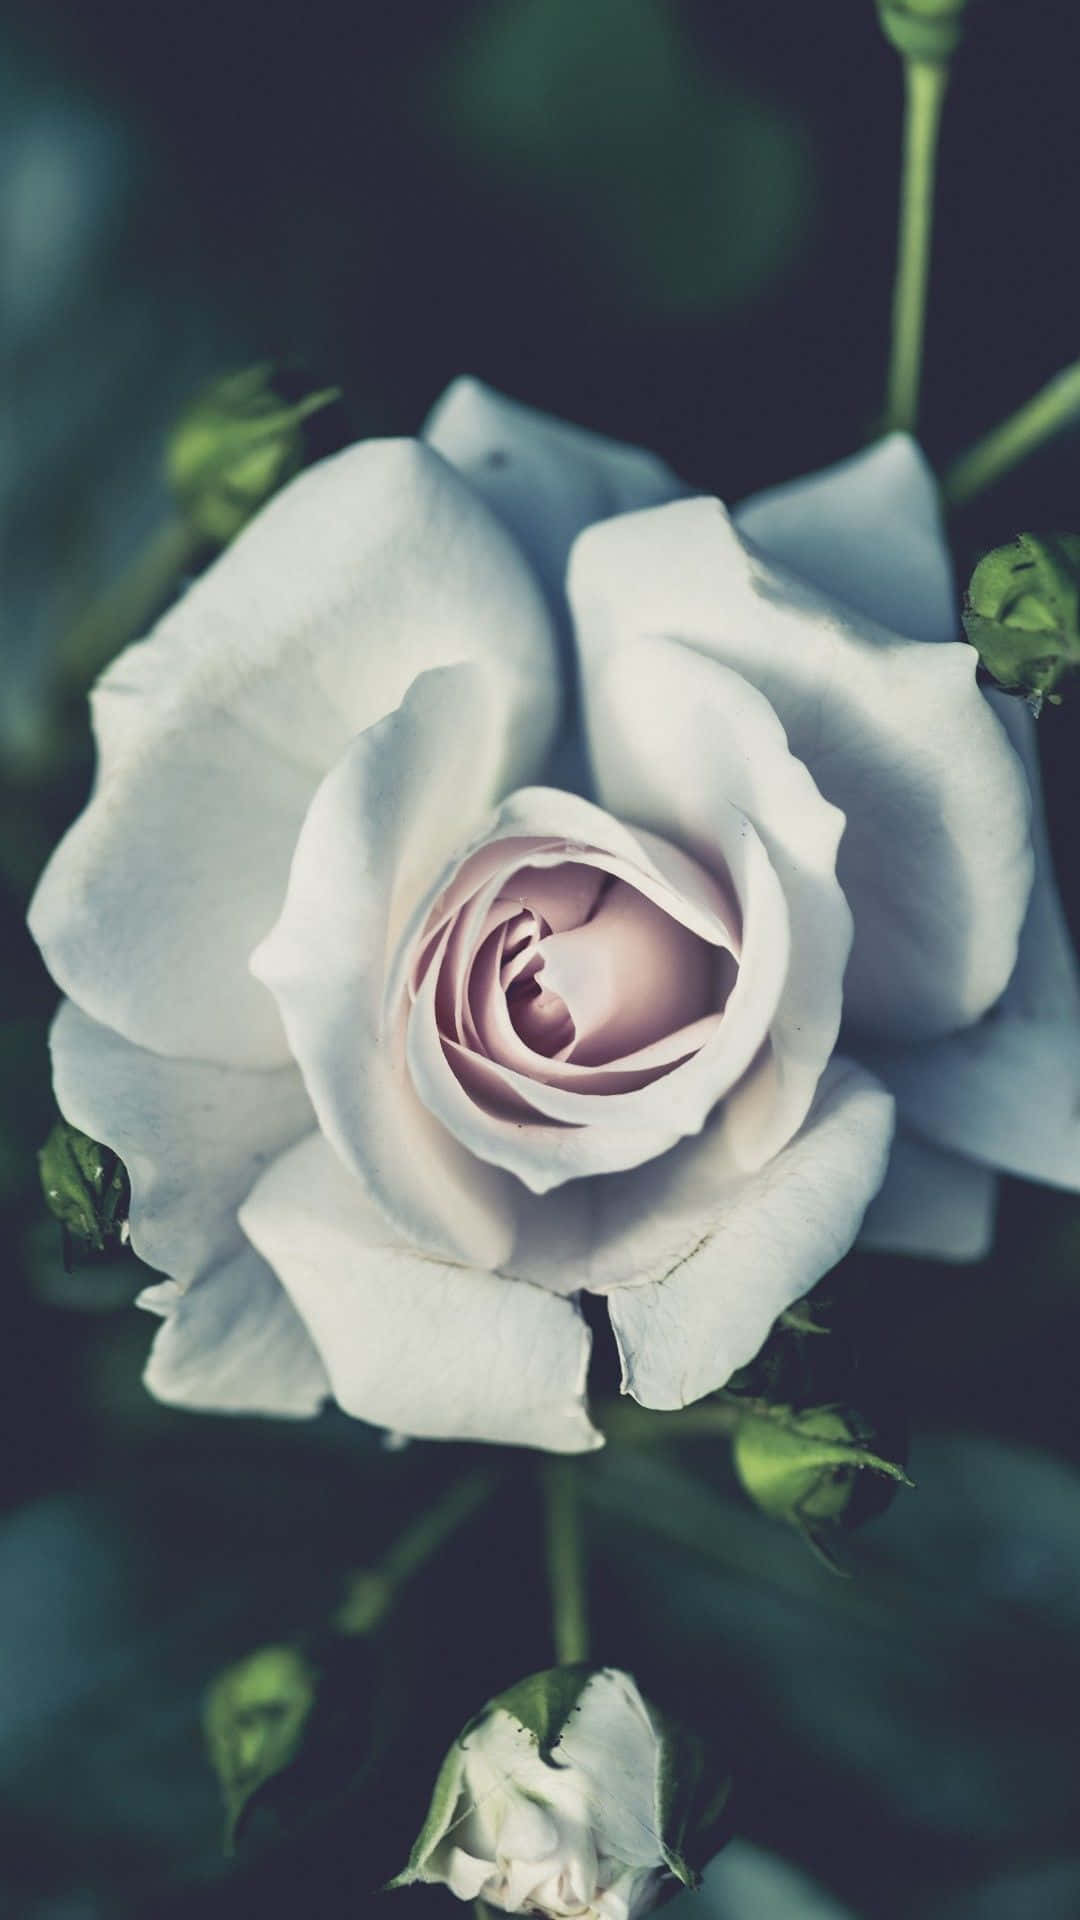 A Beautiful White Rose With A Hint Of Rose-gold.